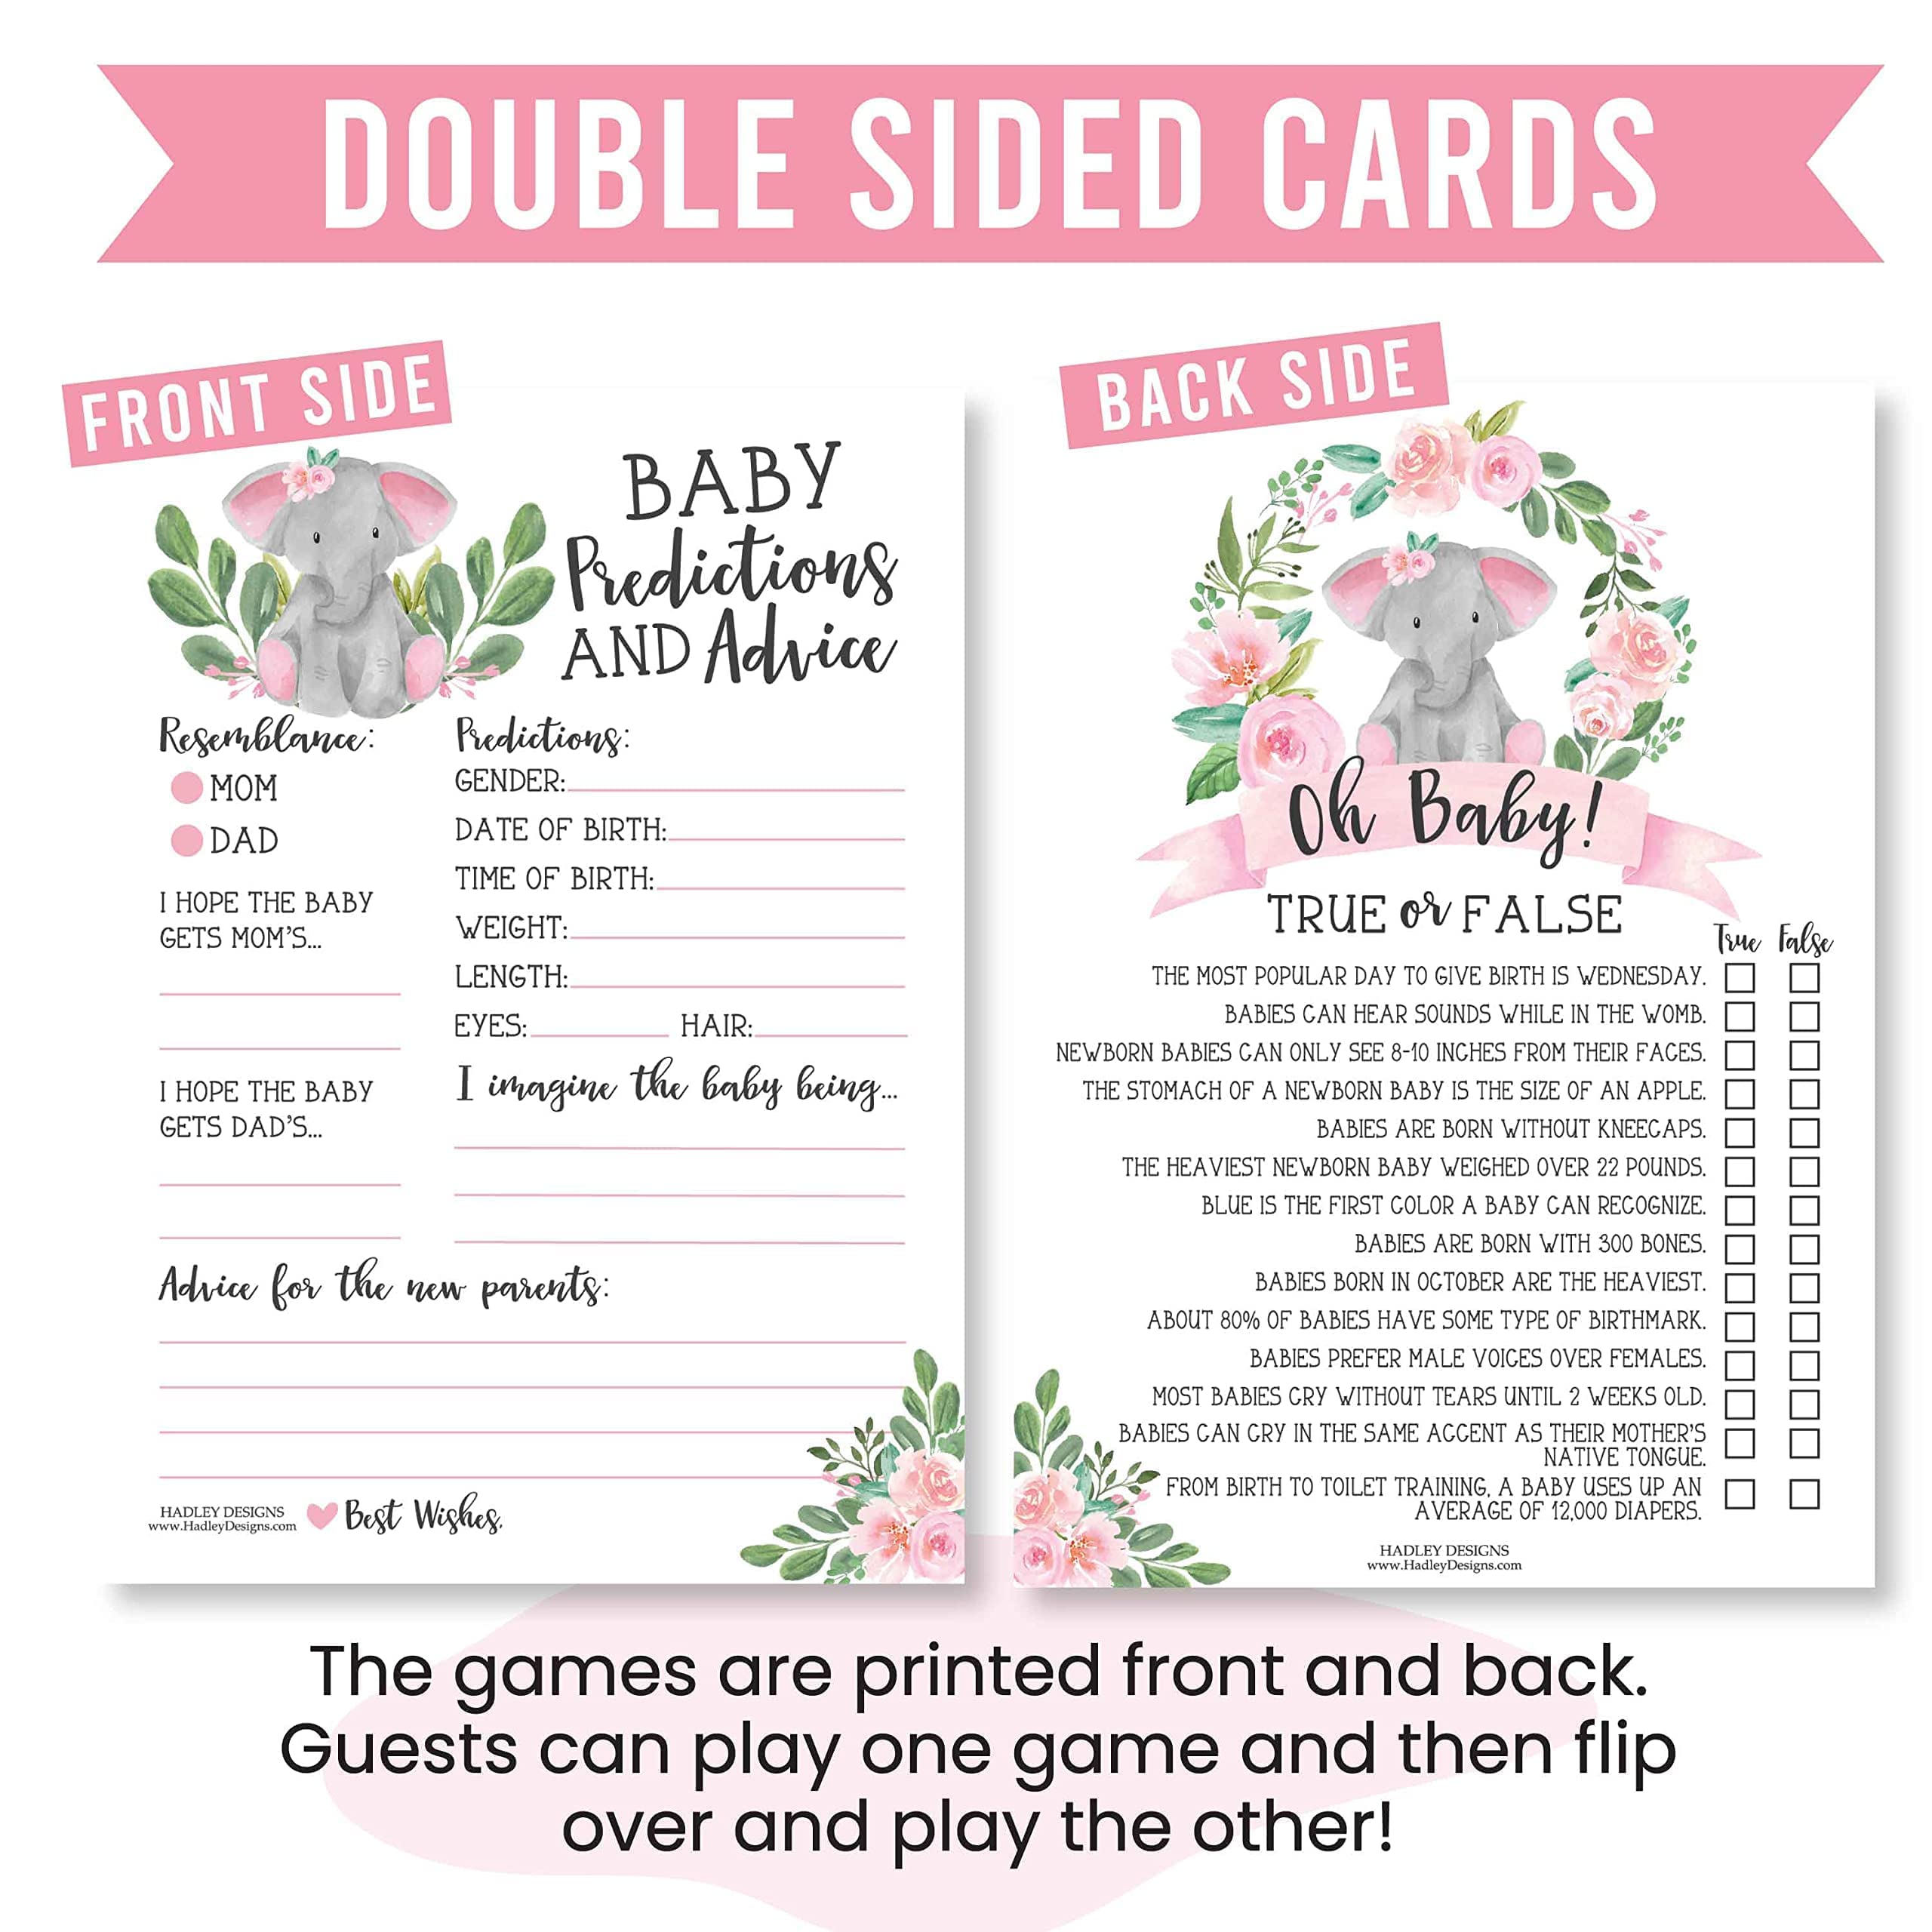 50 Elephant Baby Prediction And Advice Cards, Trivia Games, etc, 25 Baby Animal Matching, Nursery Rhyme Game - 6 Double Sided Cards Baby Shower Games Funny, Baby Shower Ideas Baby Sprinkle Games